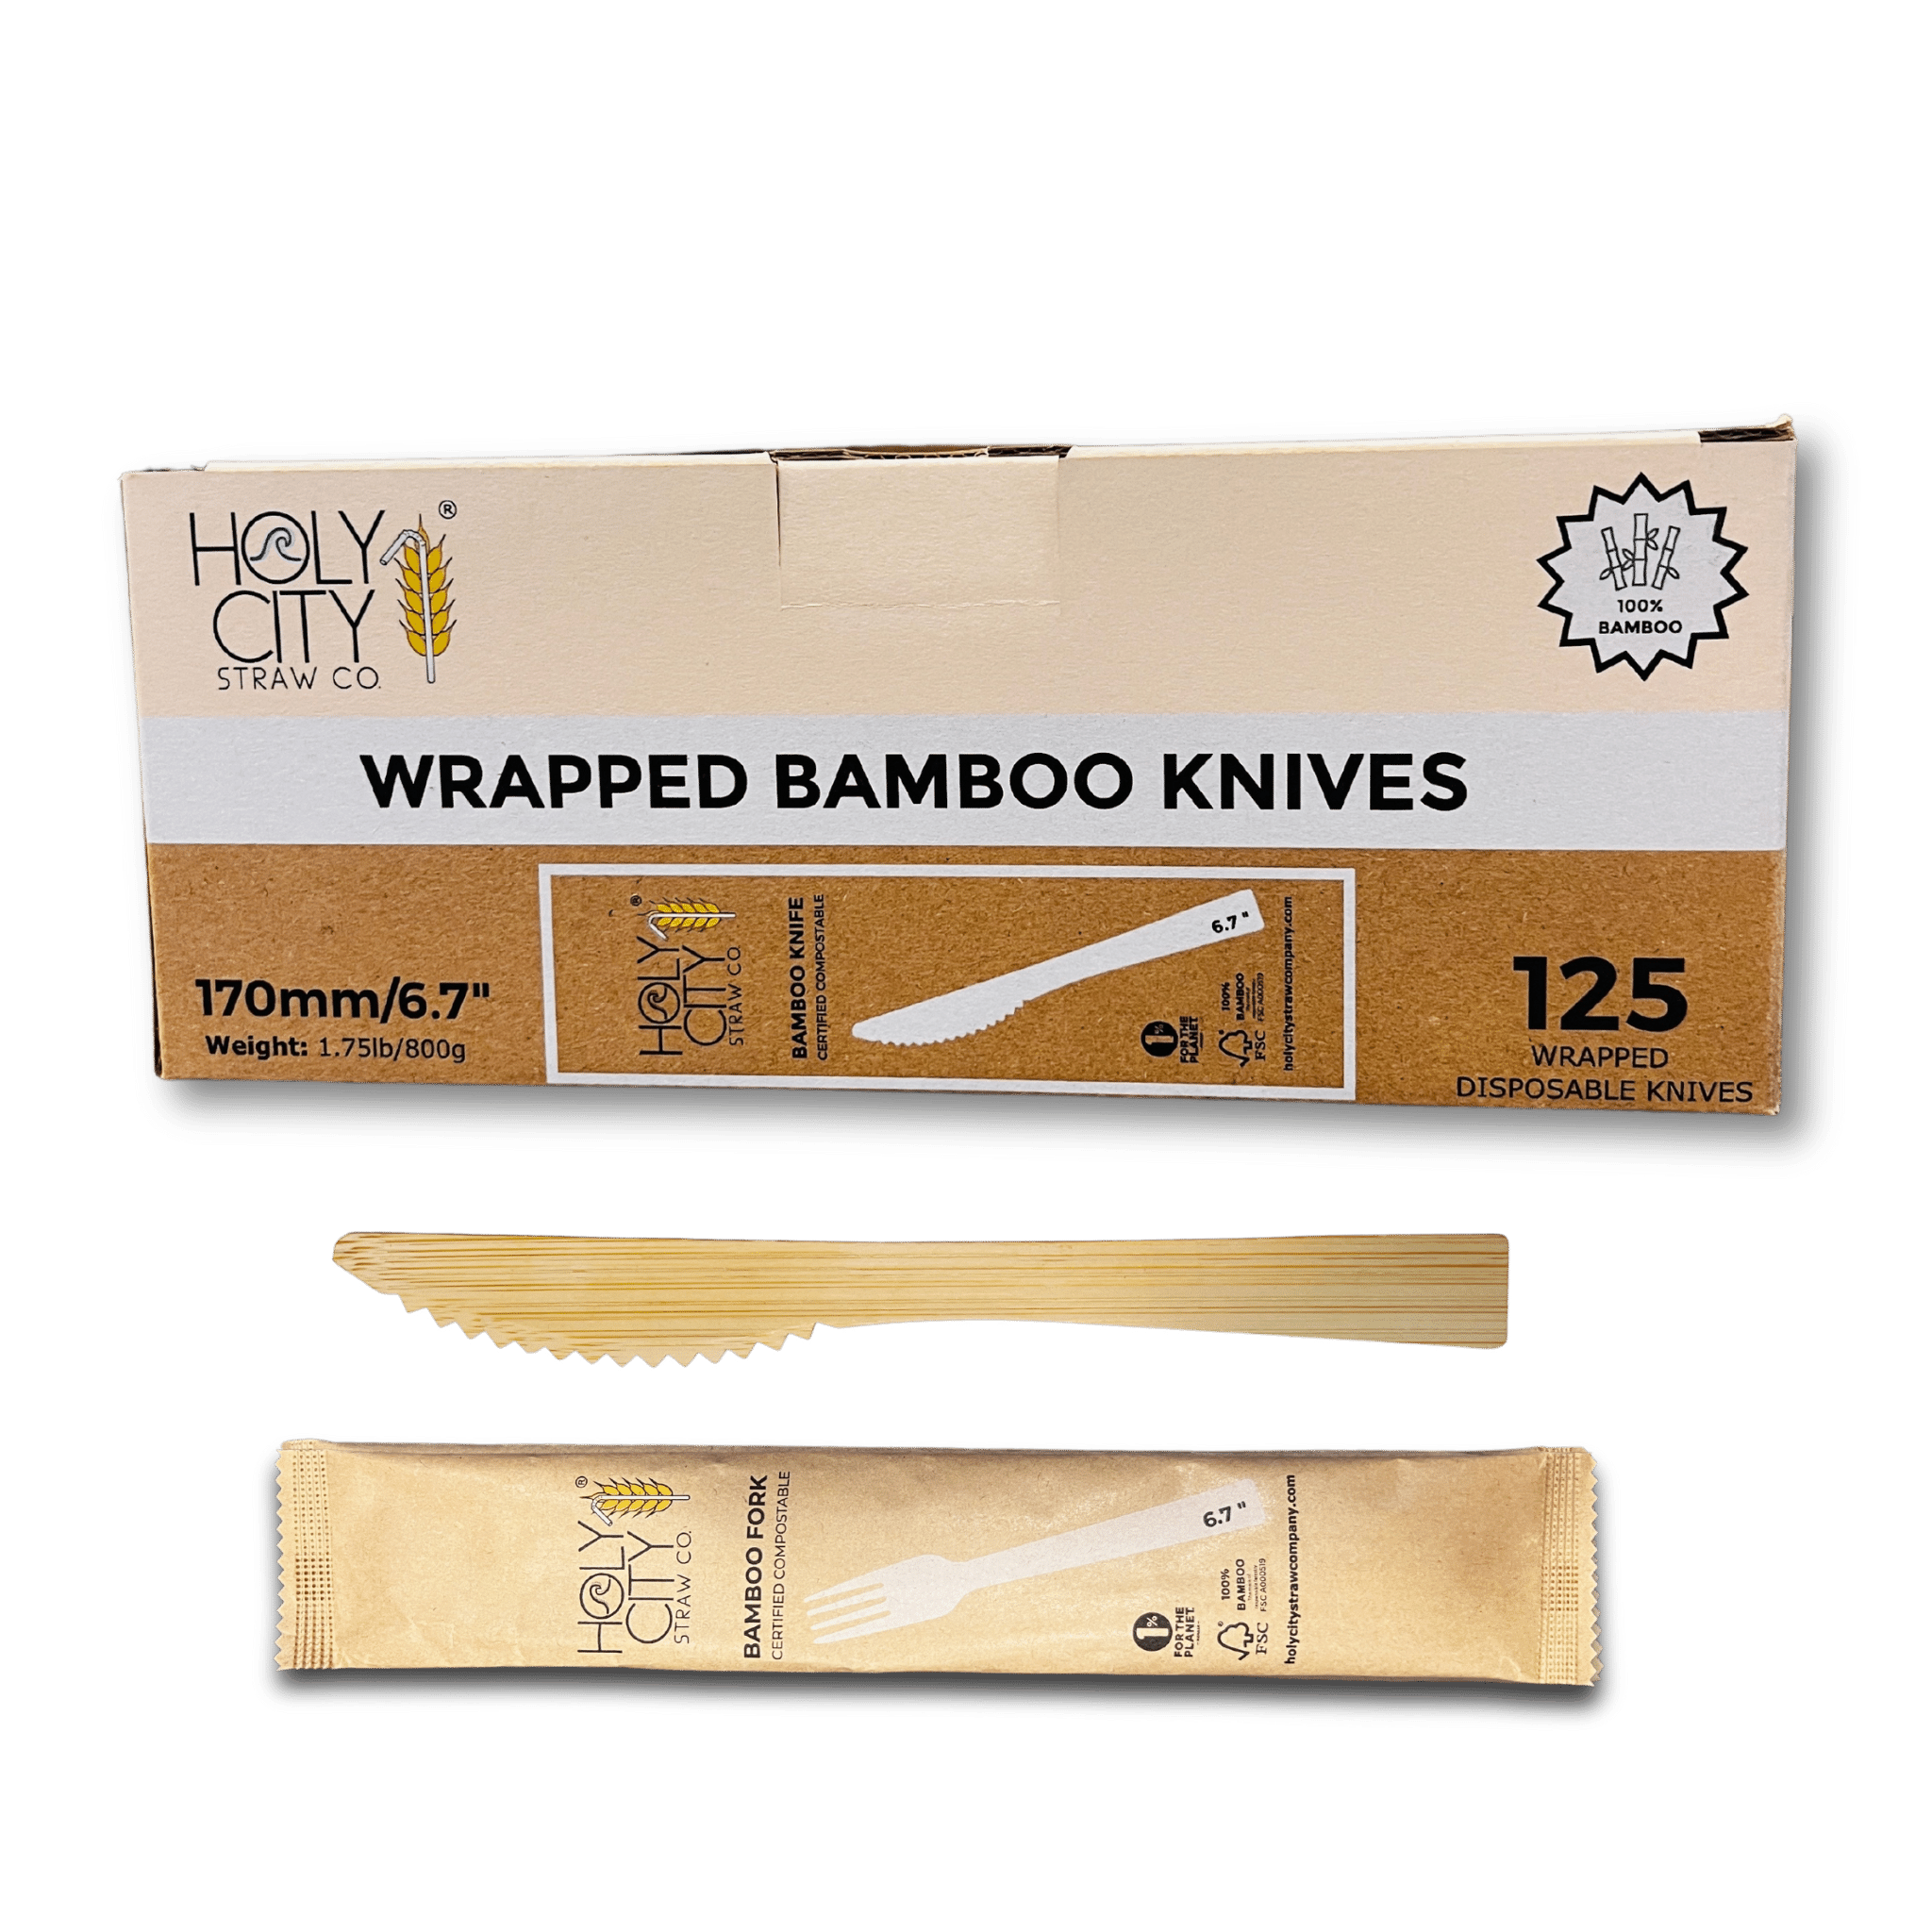 Box of Holy City Straw Company Wrapped Bamboo Knives 125 disposable knives each individually wrapped